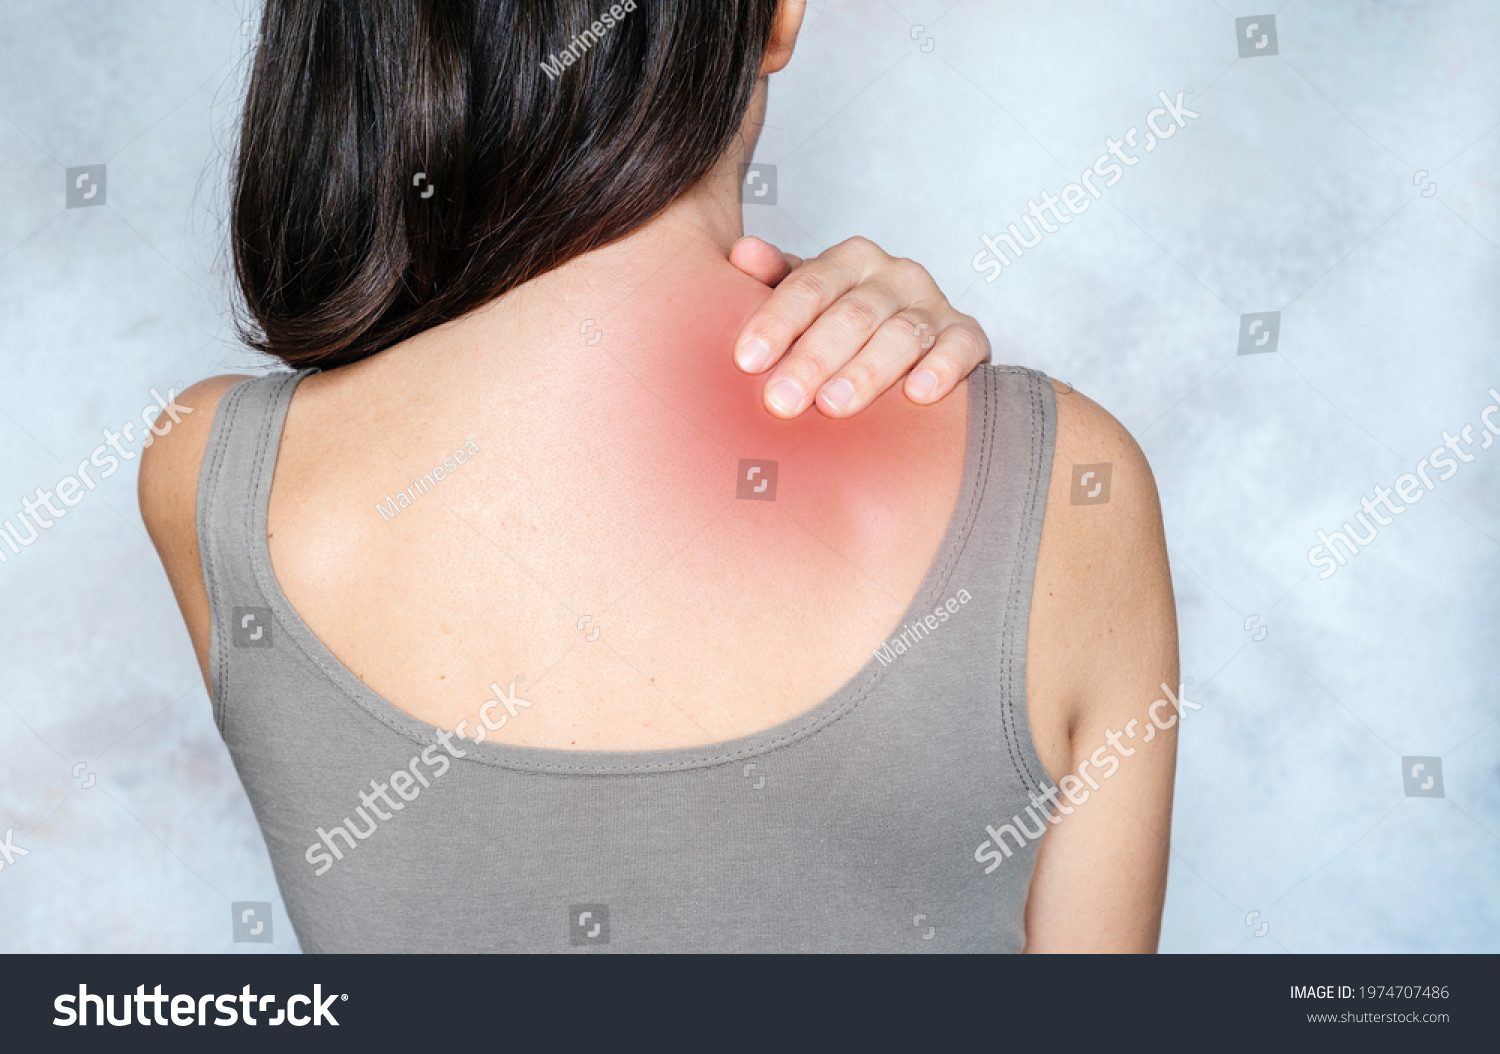 A woman massages her shoulder and neck pain points, trigger point massage, physiotherapy, and massage concept #1974707486